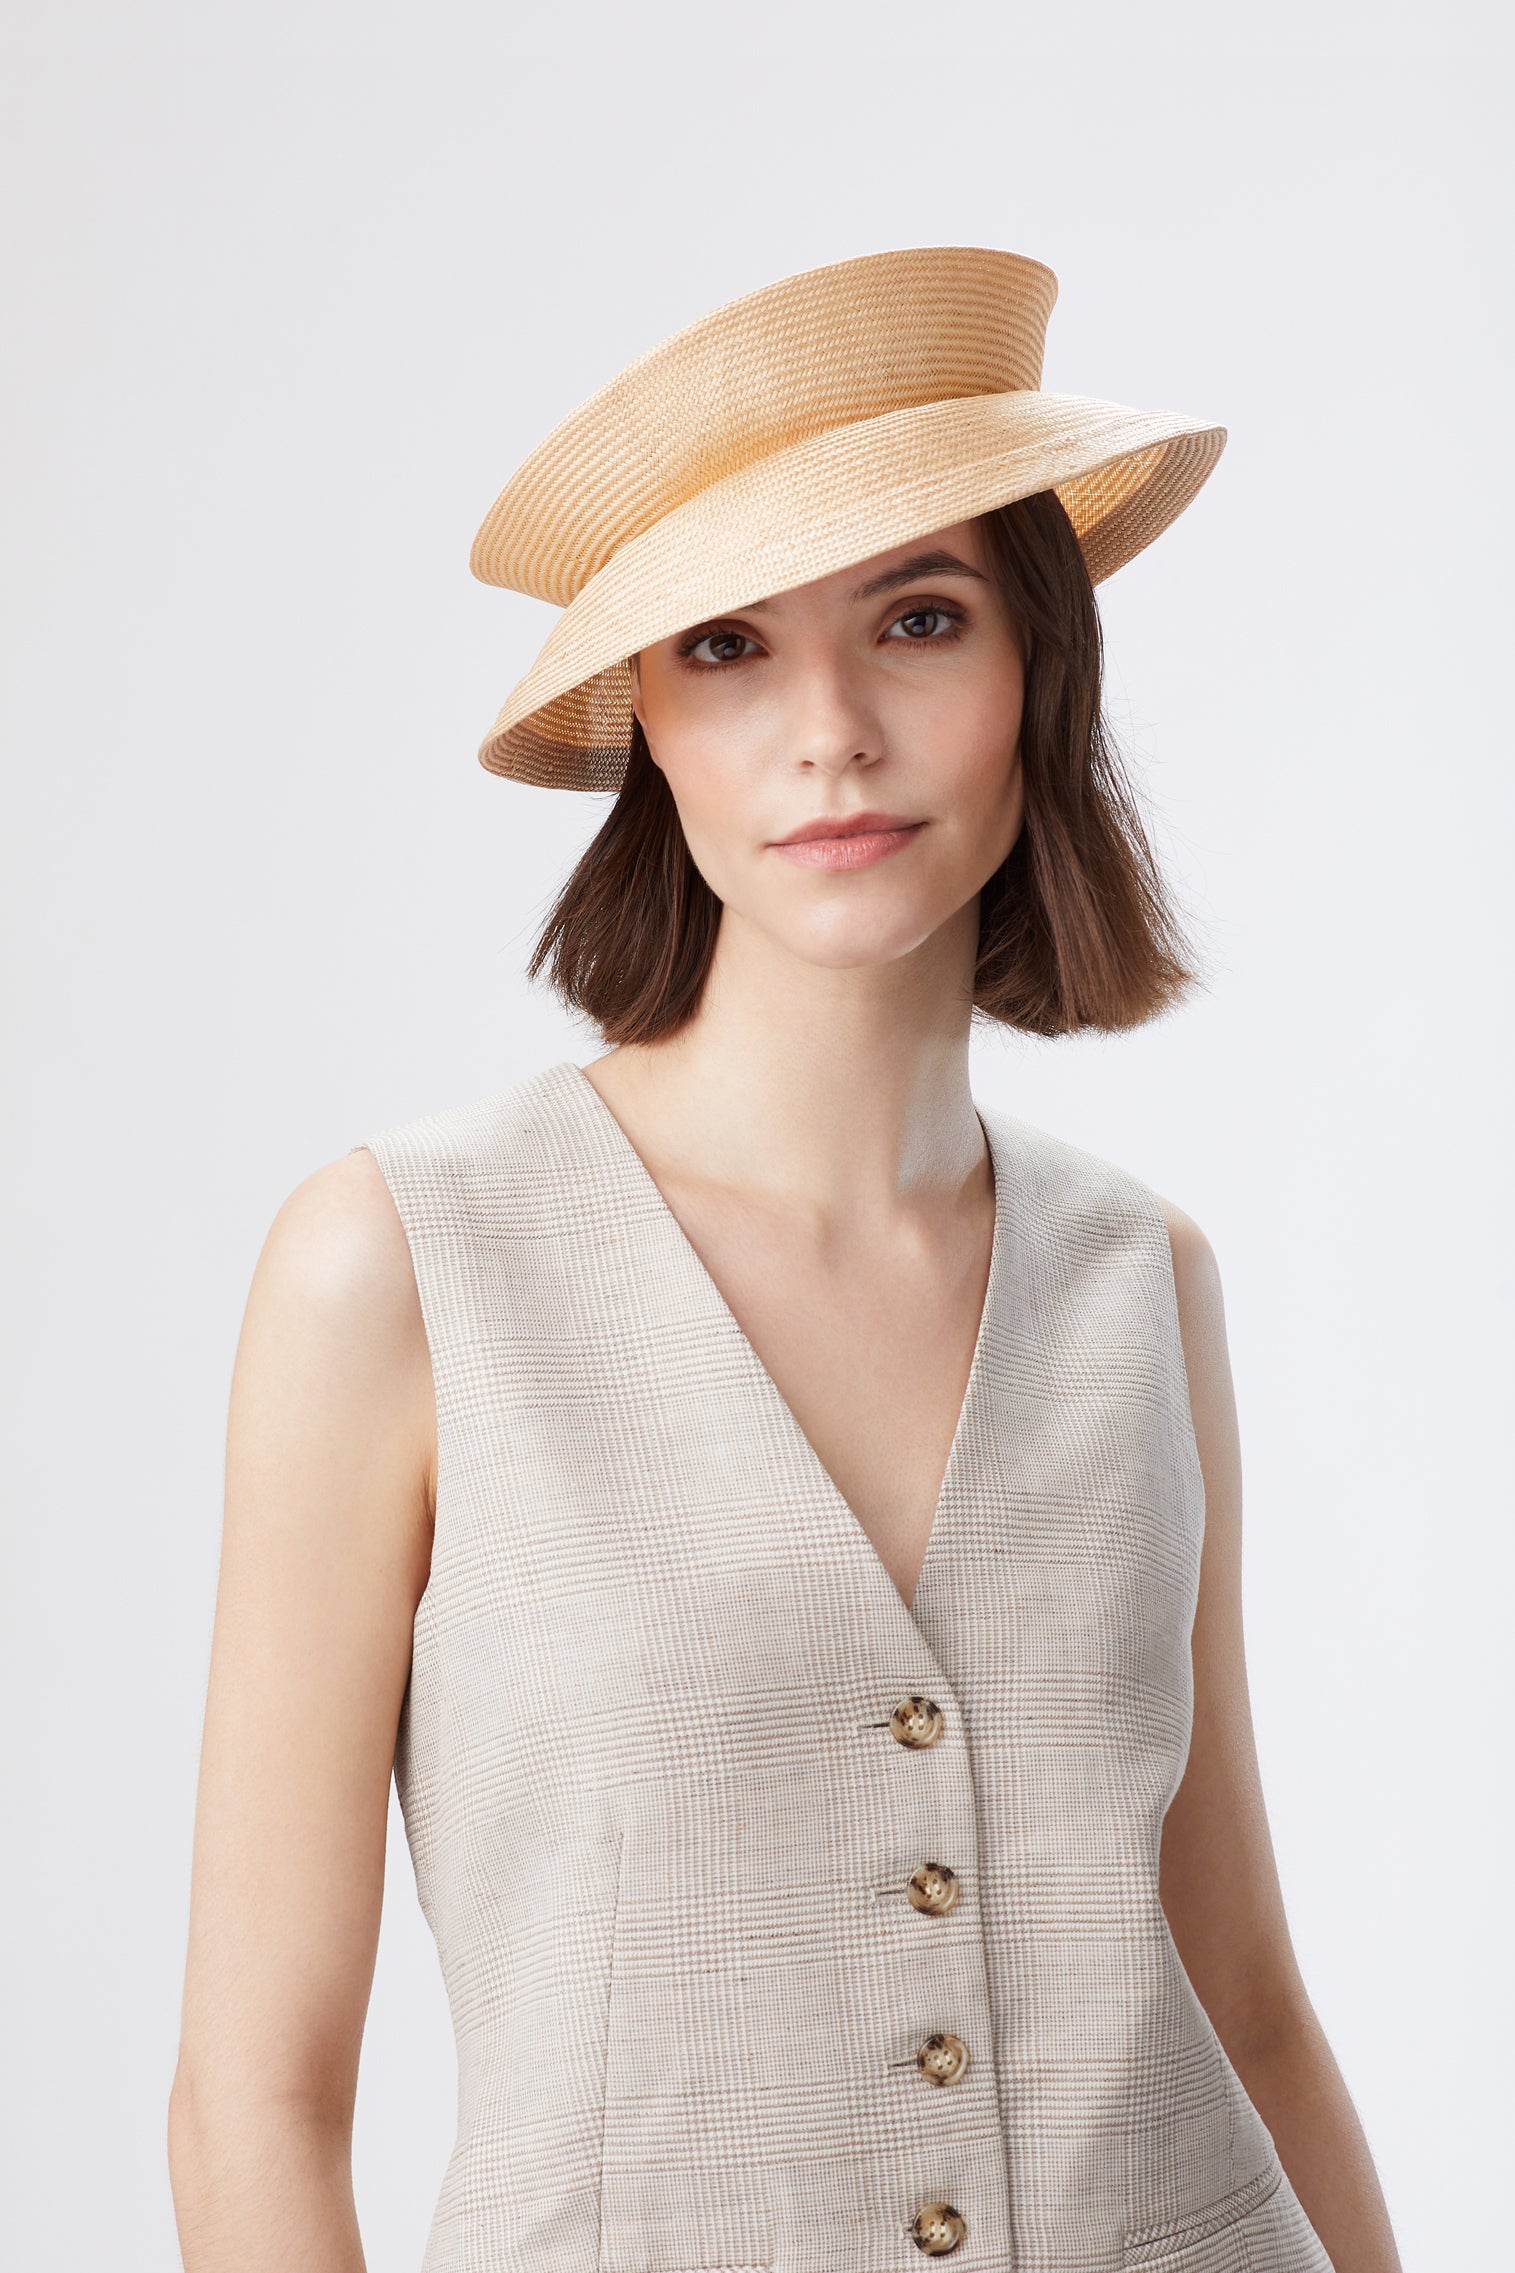 Pack'n'Go Collapsible Sun Hat - Womens Featured - Lock & Co. Hatters London UK